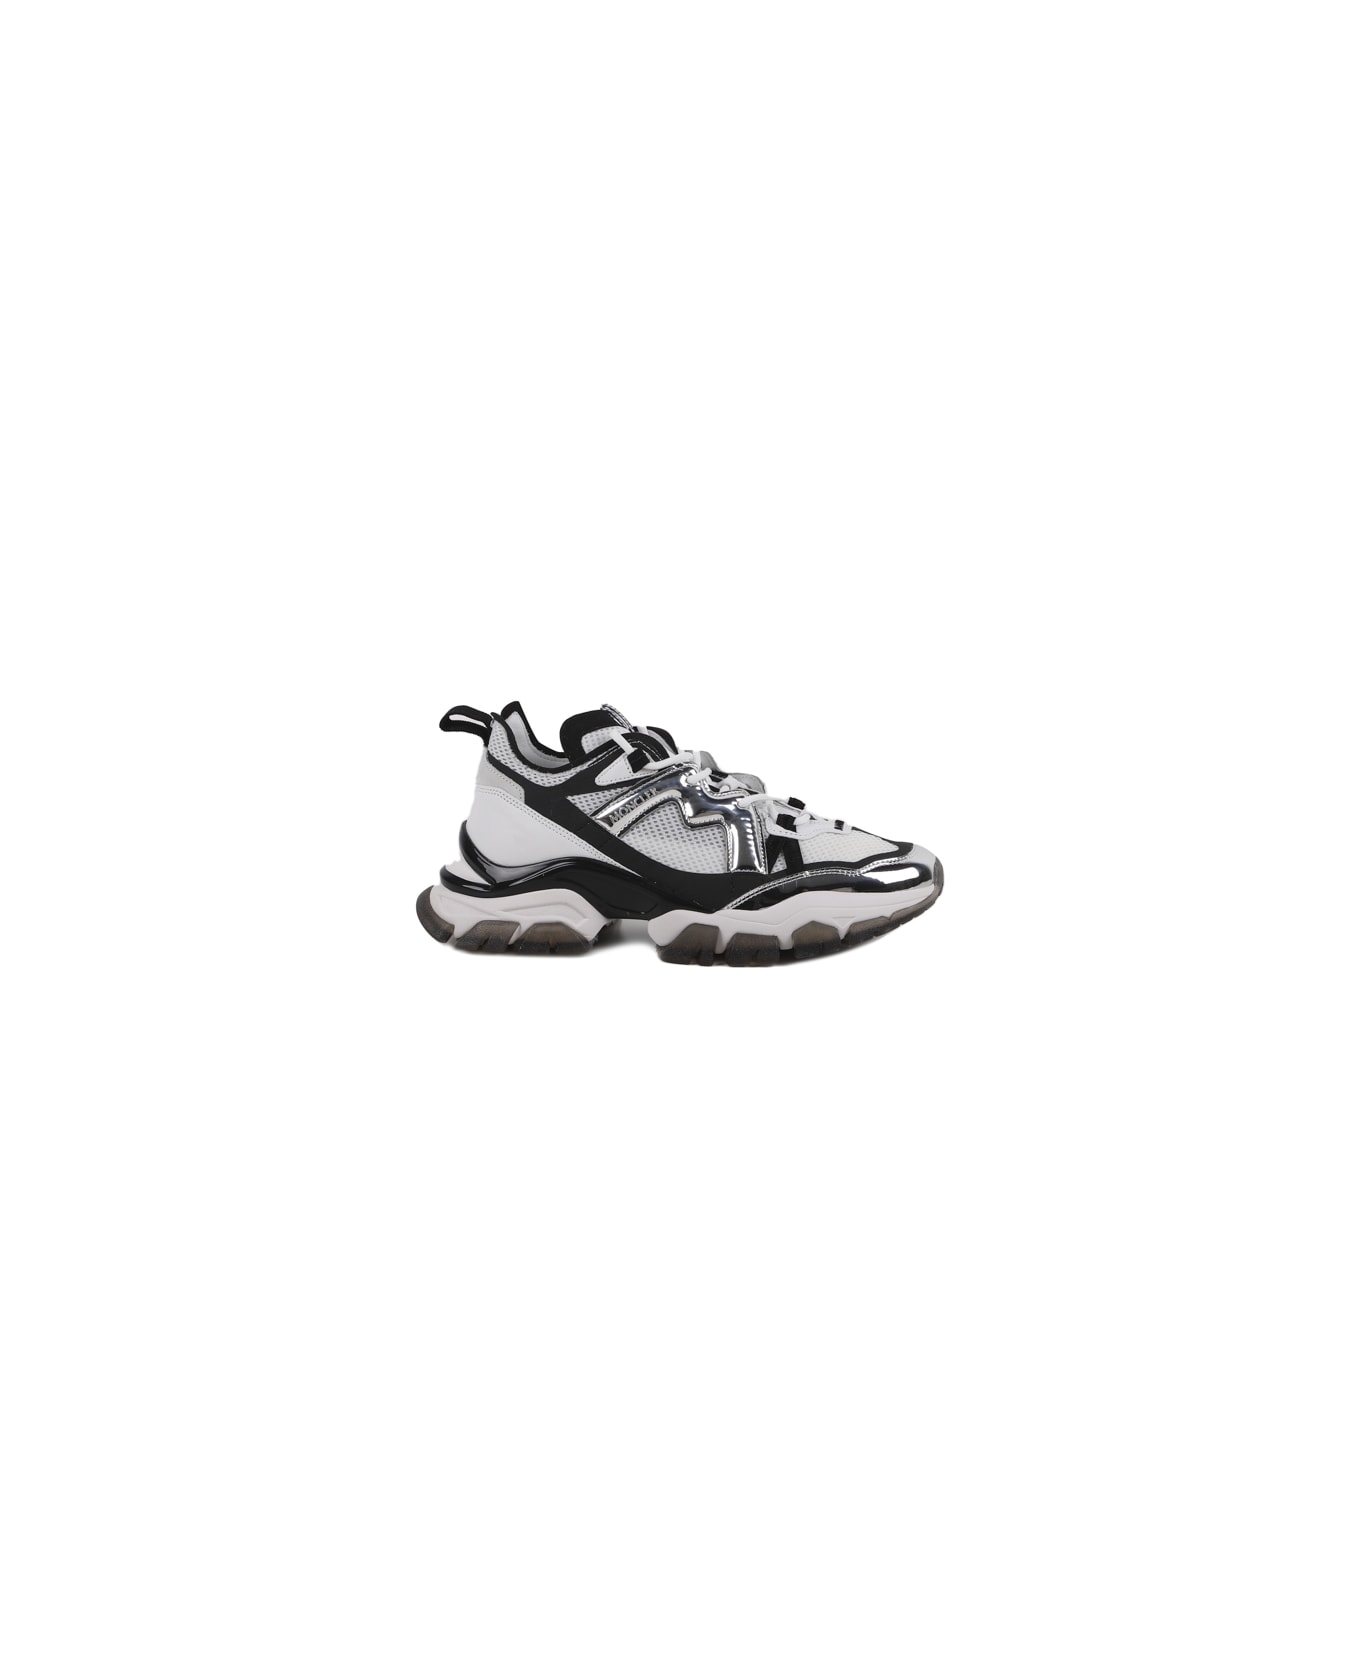 Moncler Leave No Trace Sneakers - White, black スニーカー